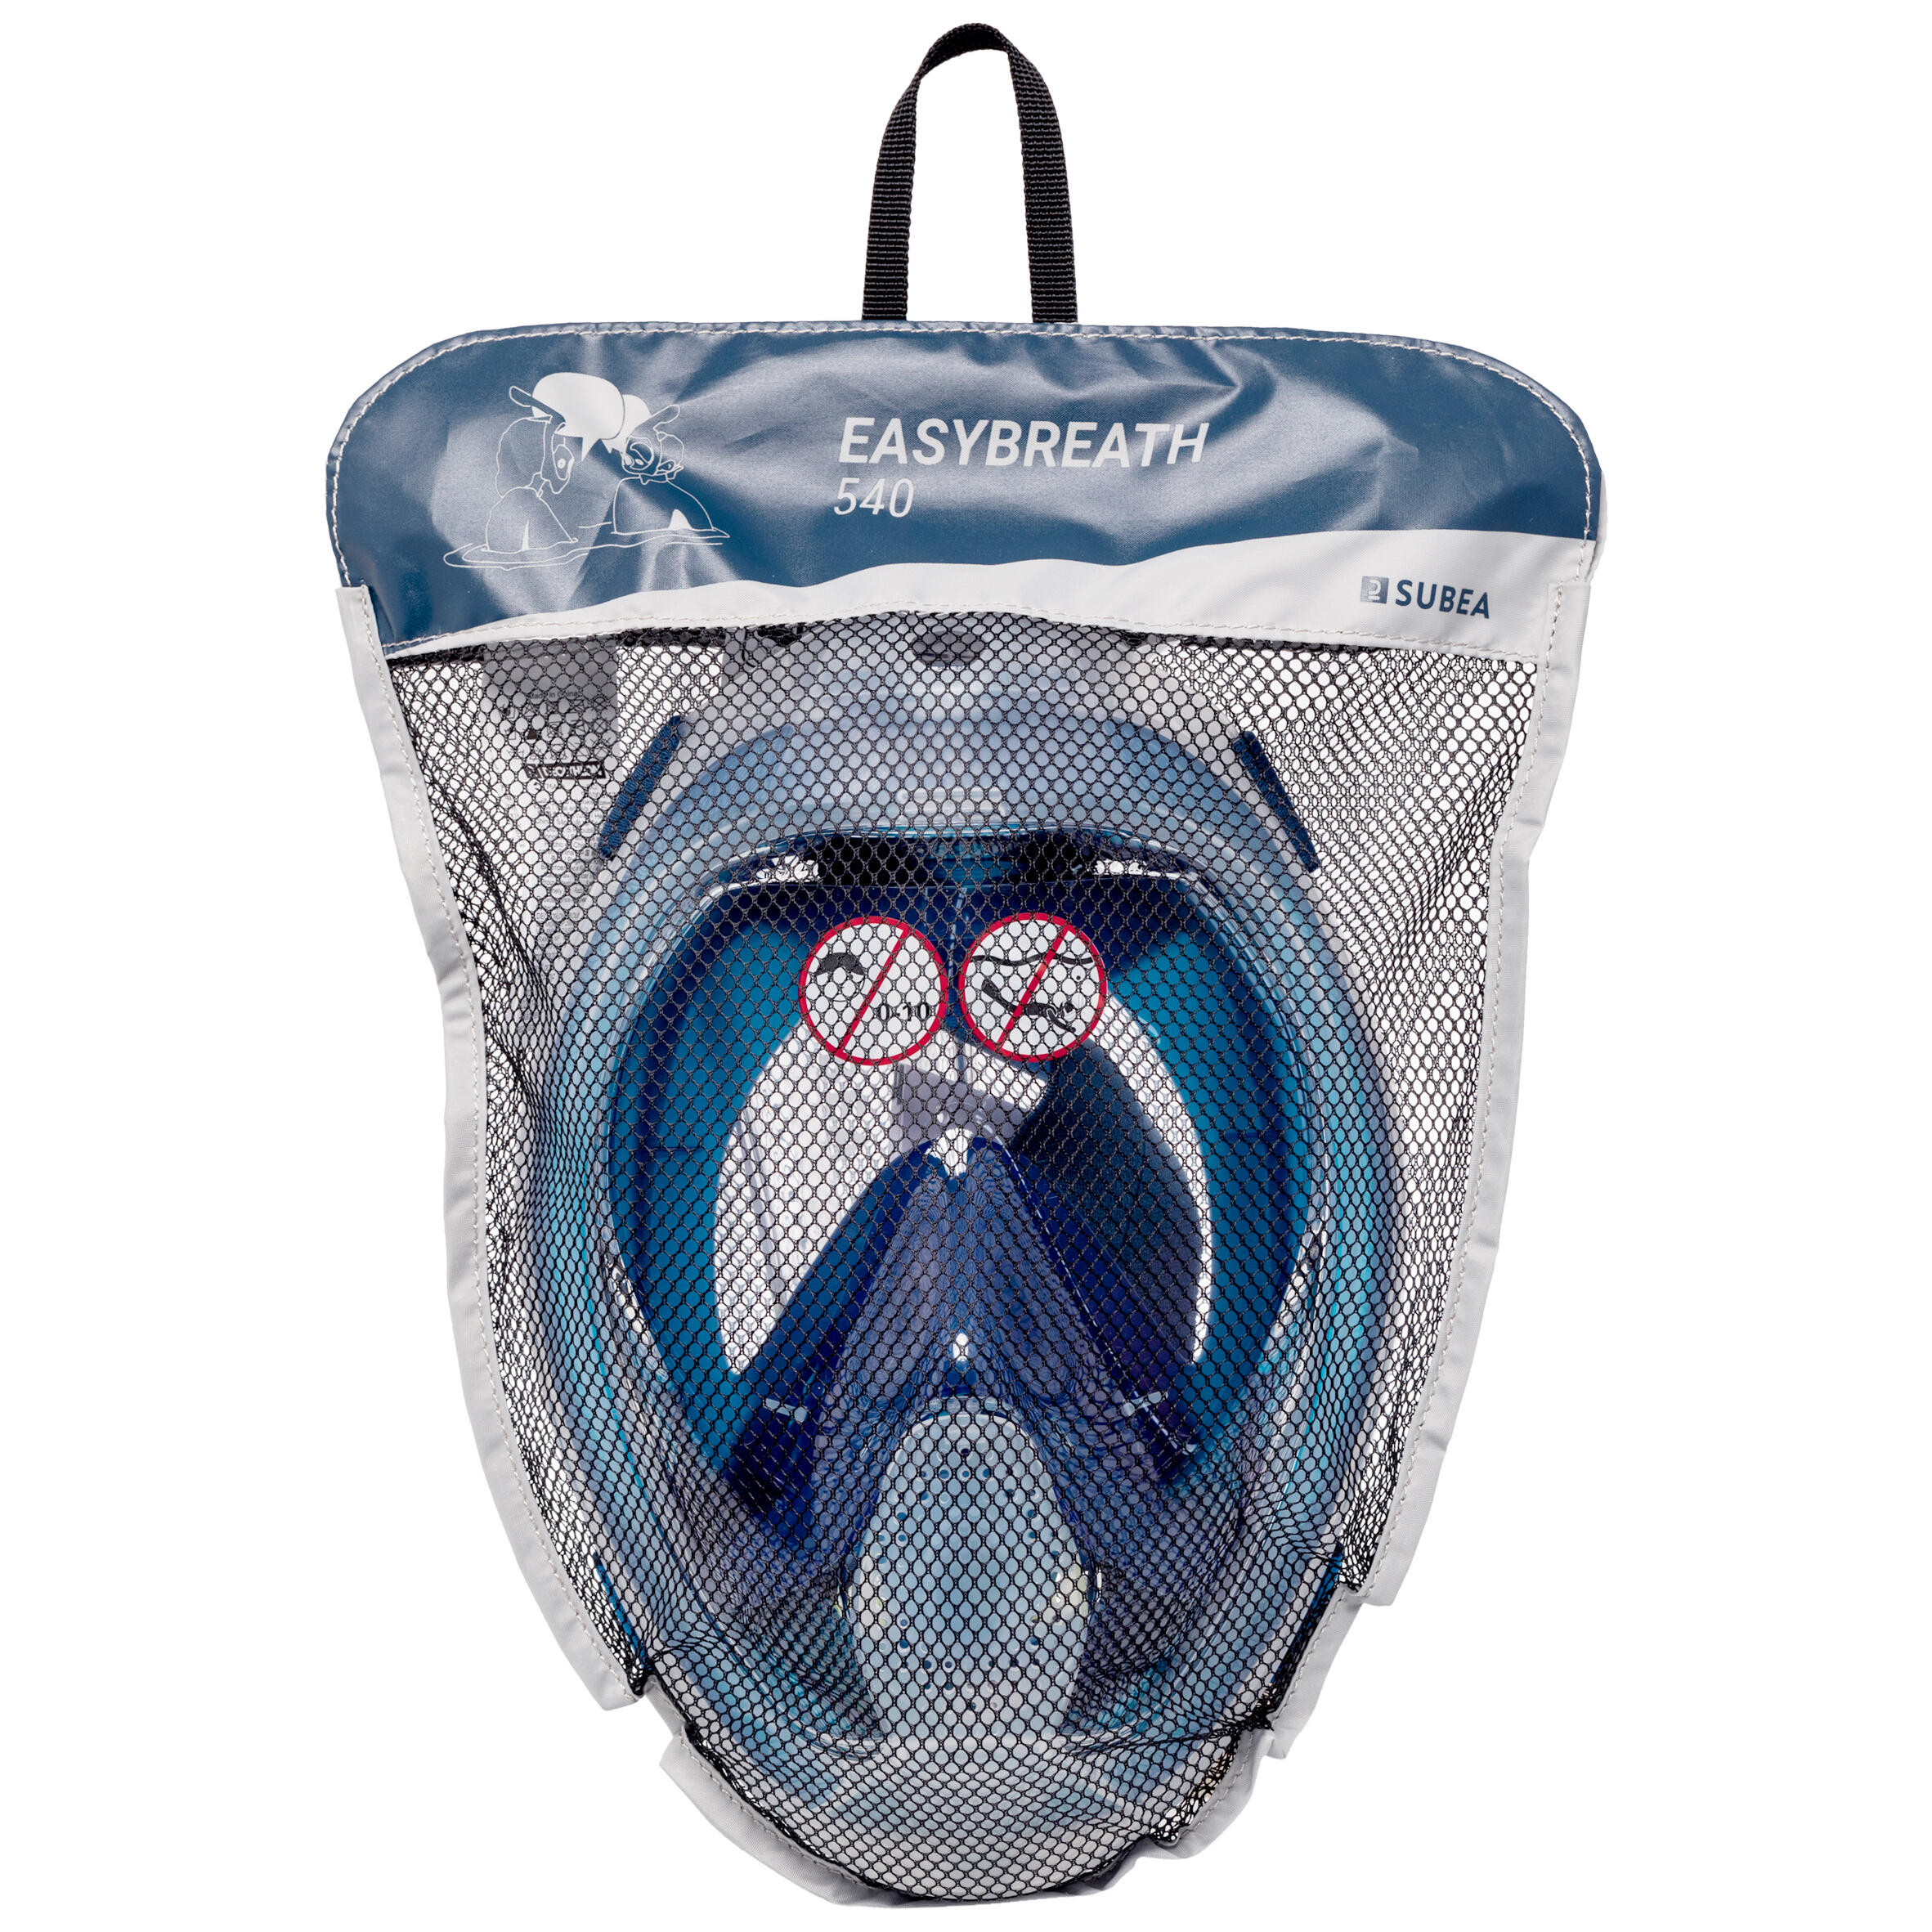 Adult’s Easybreath surface mask with an acoustic valve - 540 freetalk blue 7/8